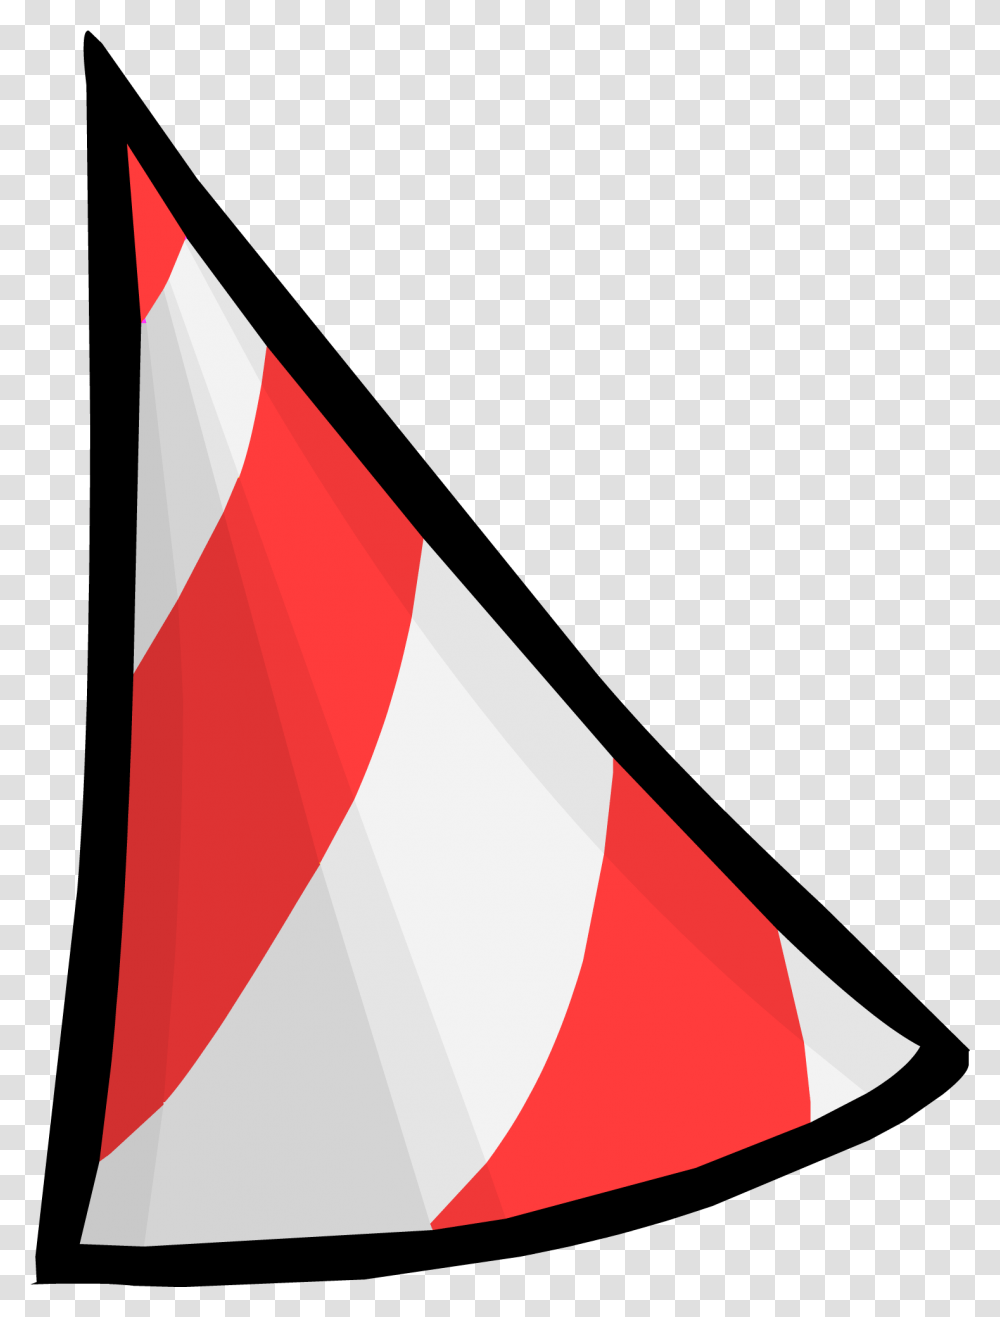 1st Anniversary Party Hat Club Penguin Rewritten Wiki Fandom Flag, Clothing, Apparel, Symbol, Cone Transparent Png